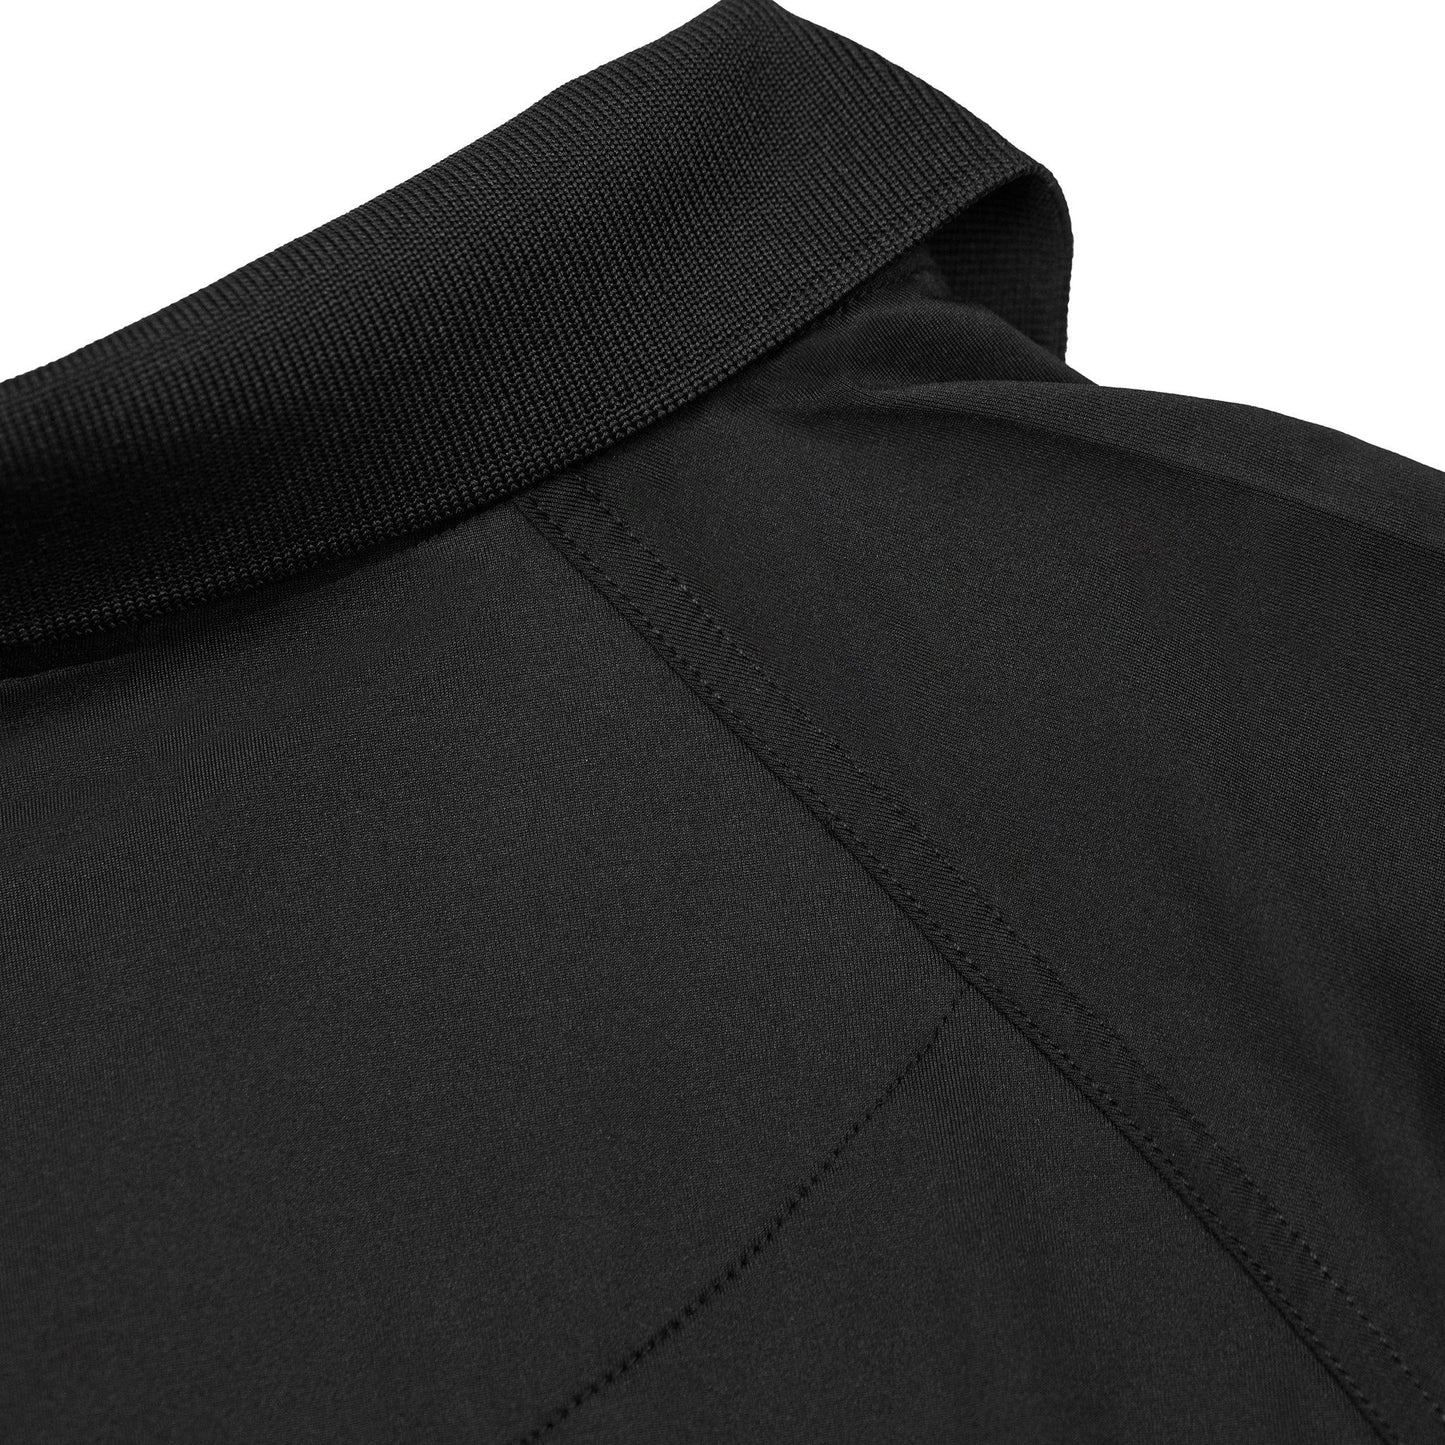 [SWAT] Men's Performance Polo [BLK/GRN]-13 Fifty Apparel